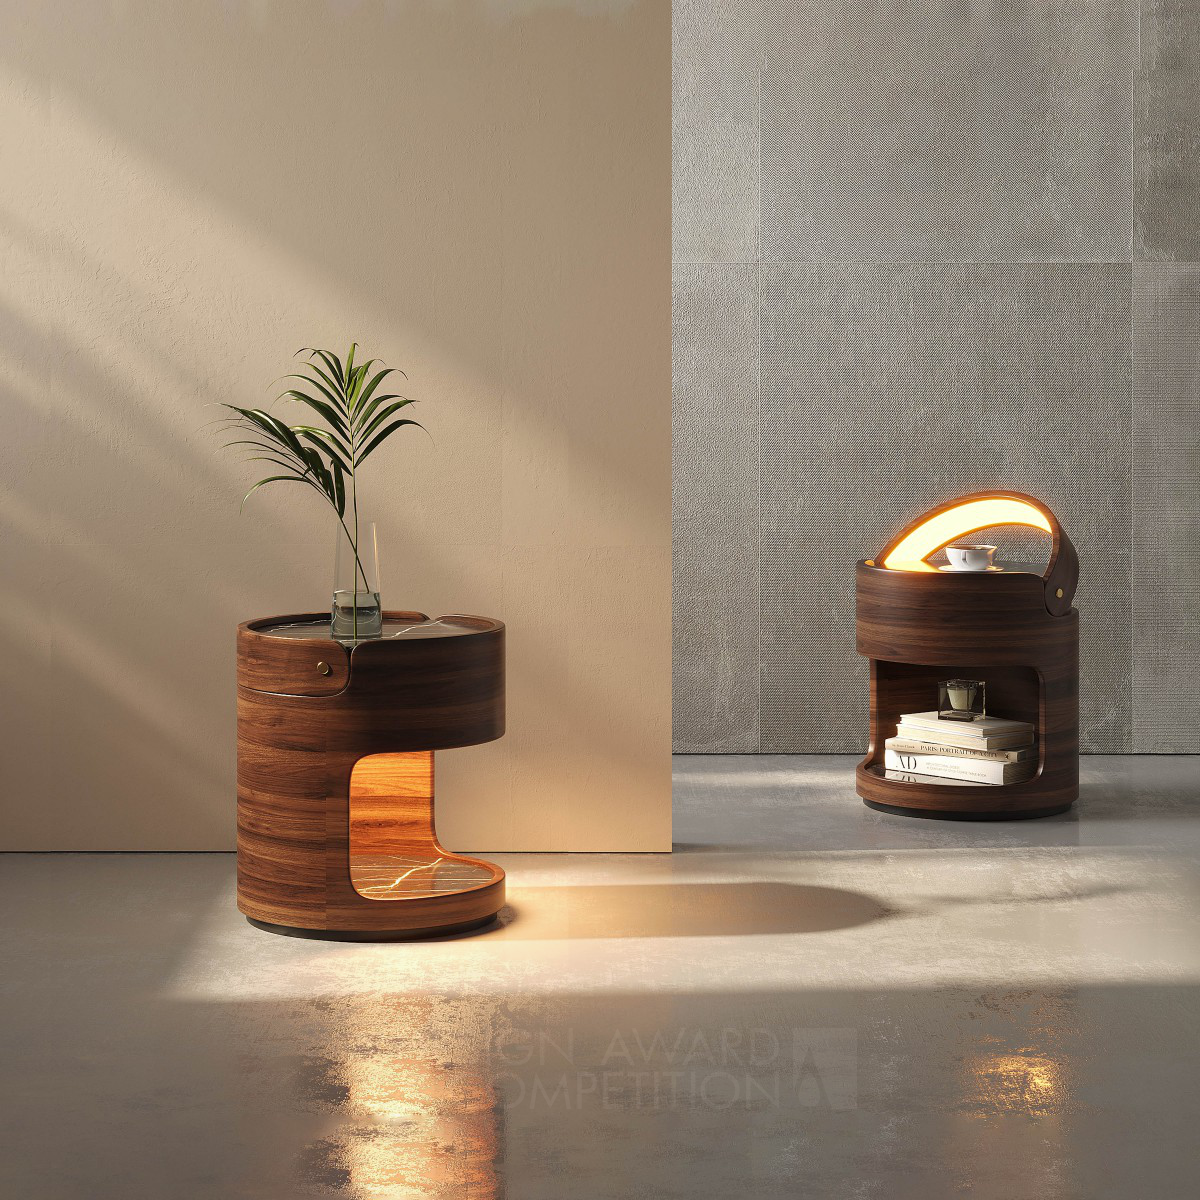 Good Side Table With Lights Design